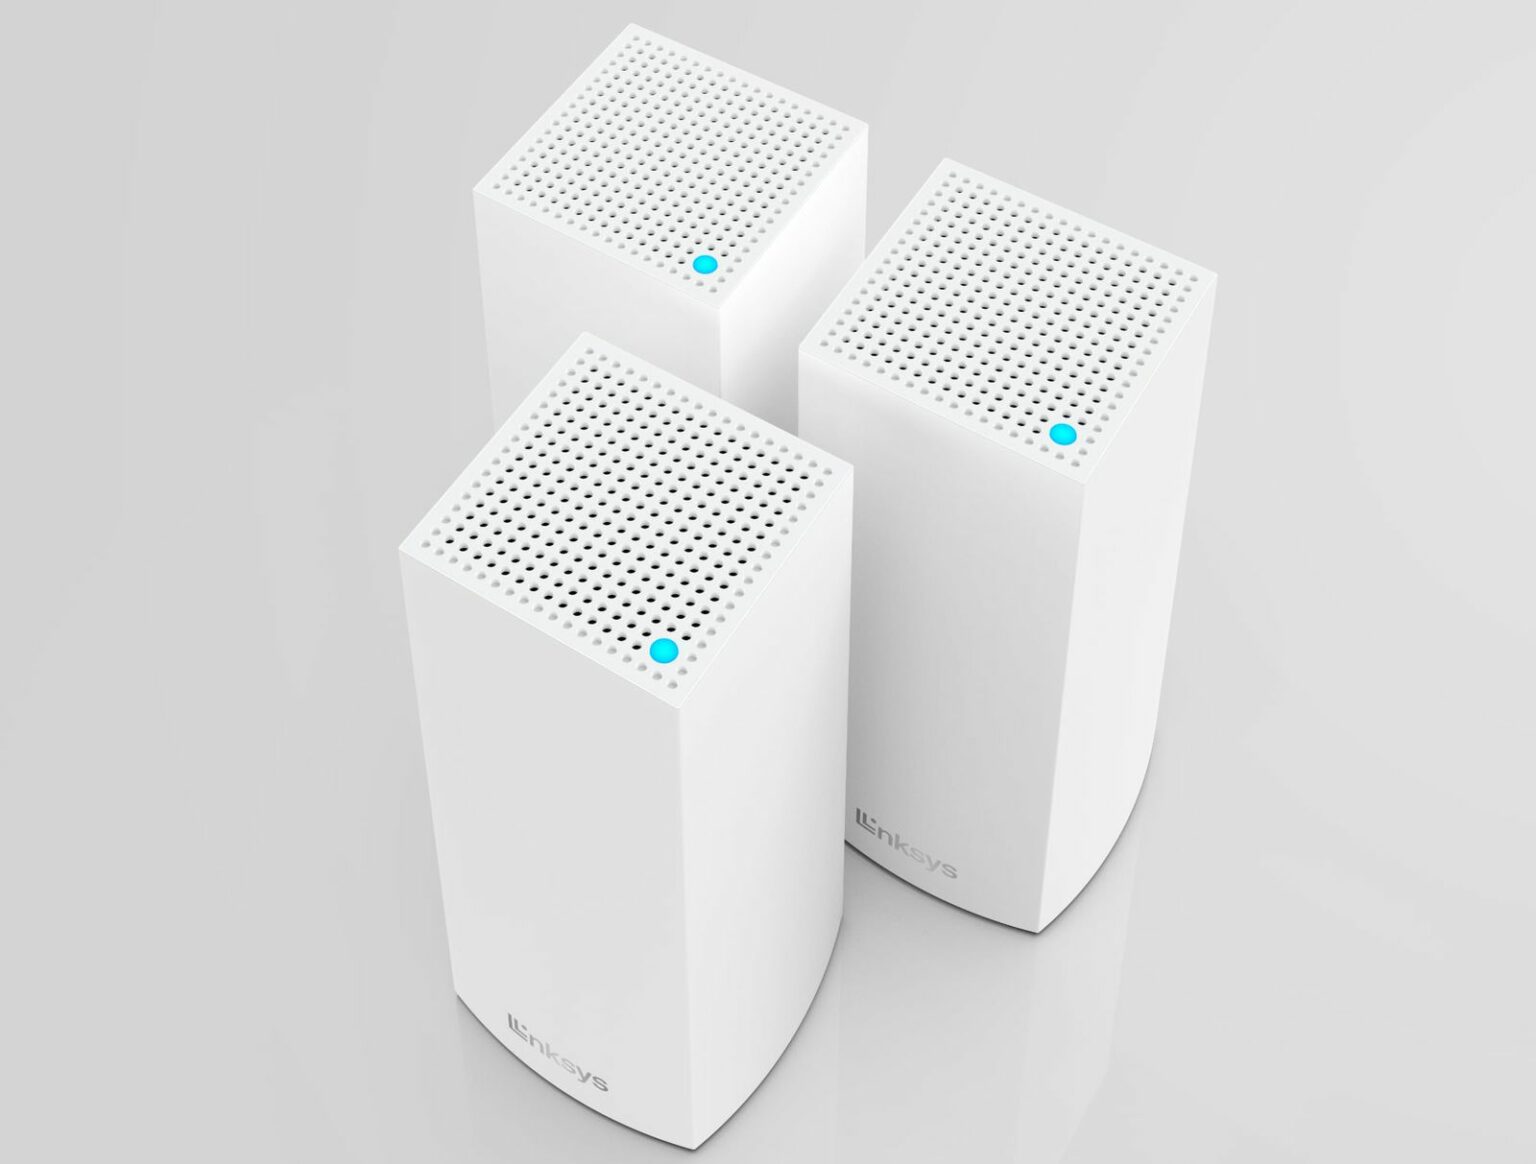 The Linksys Atlas 6 Wi-Fi 6 mesh router system comes in multiple variations.